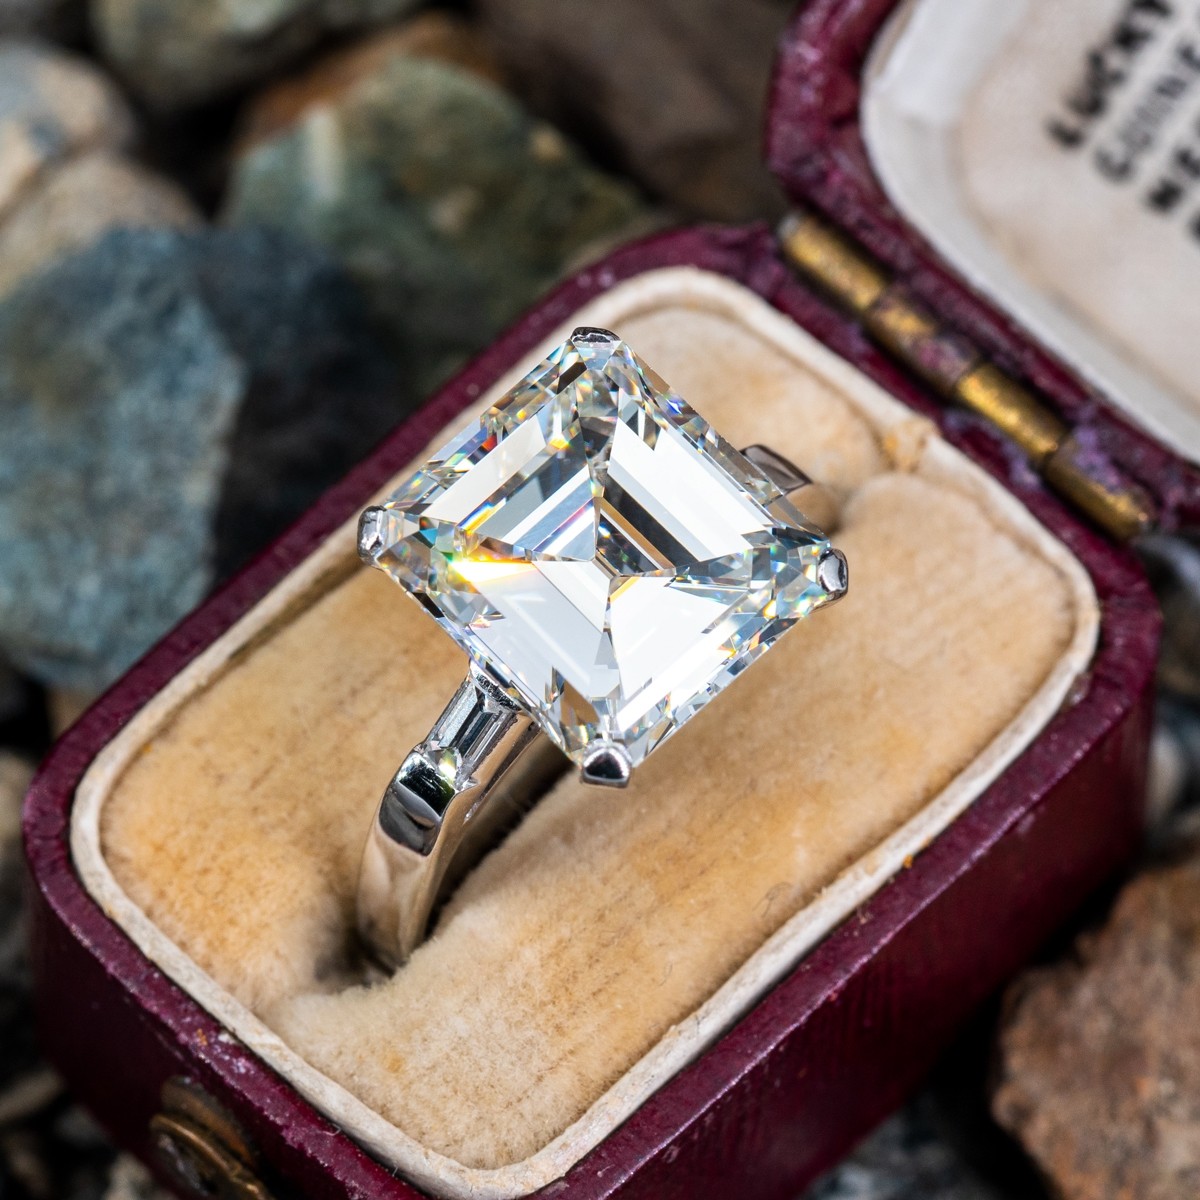 Gemstone Engagement Rings: Things You Need to Know